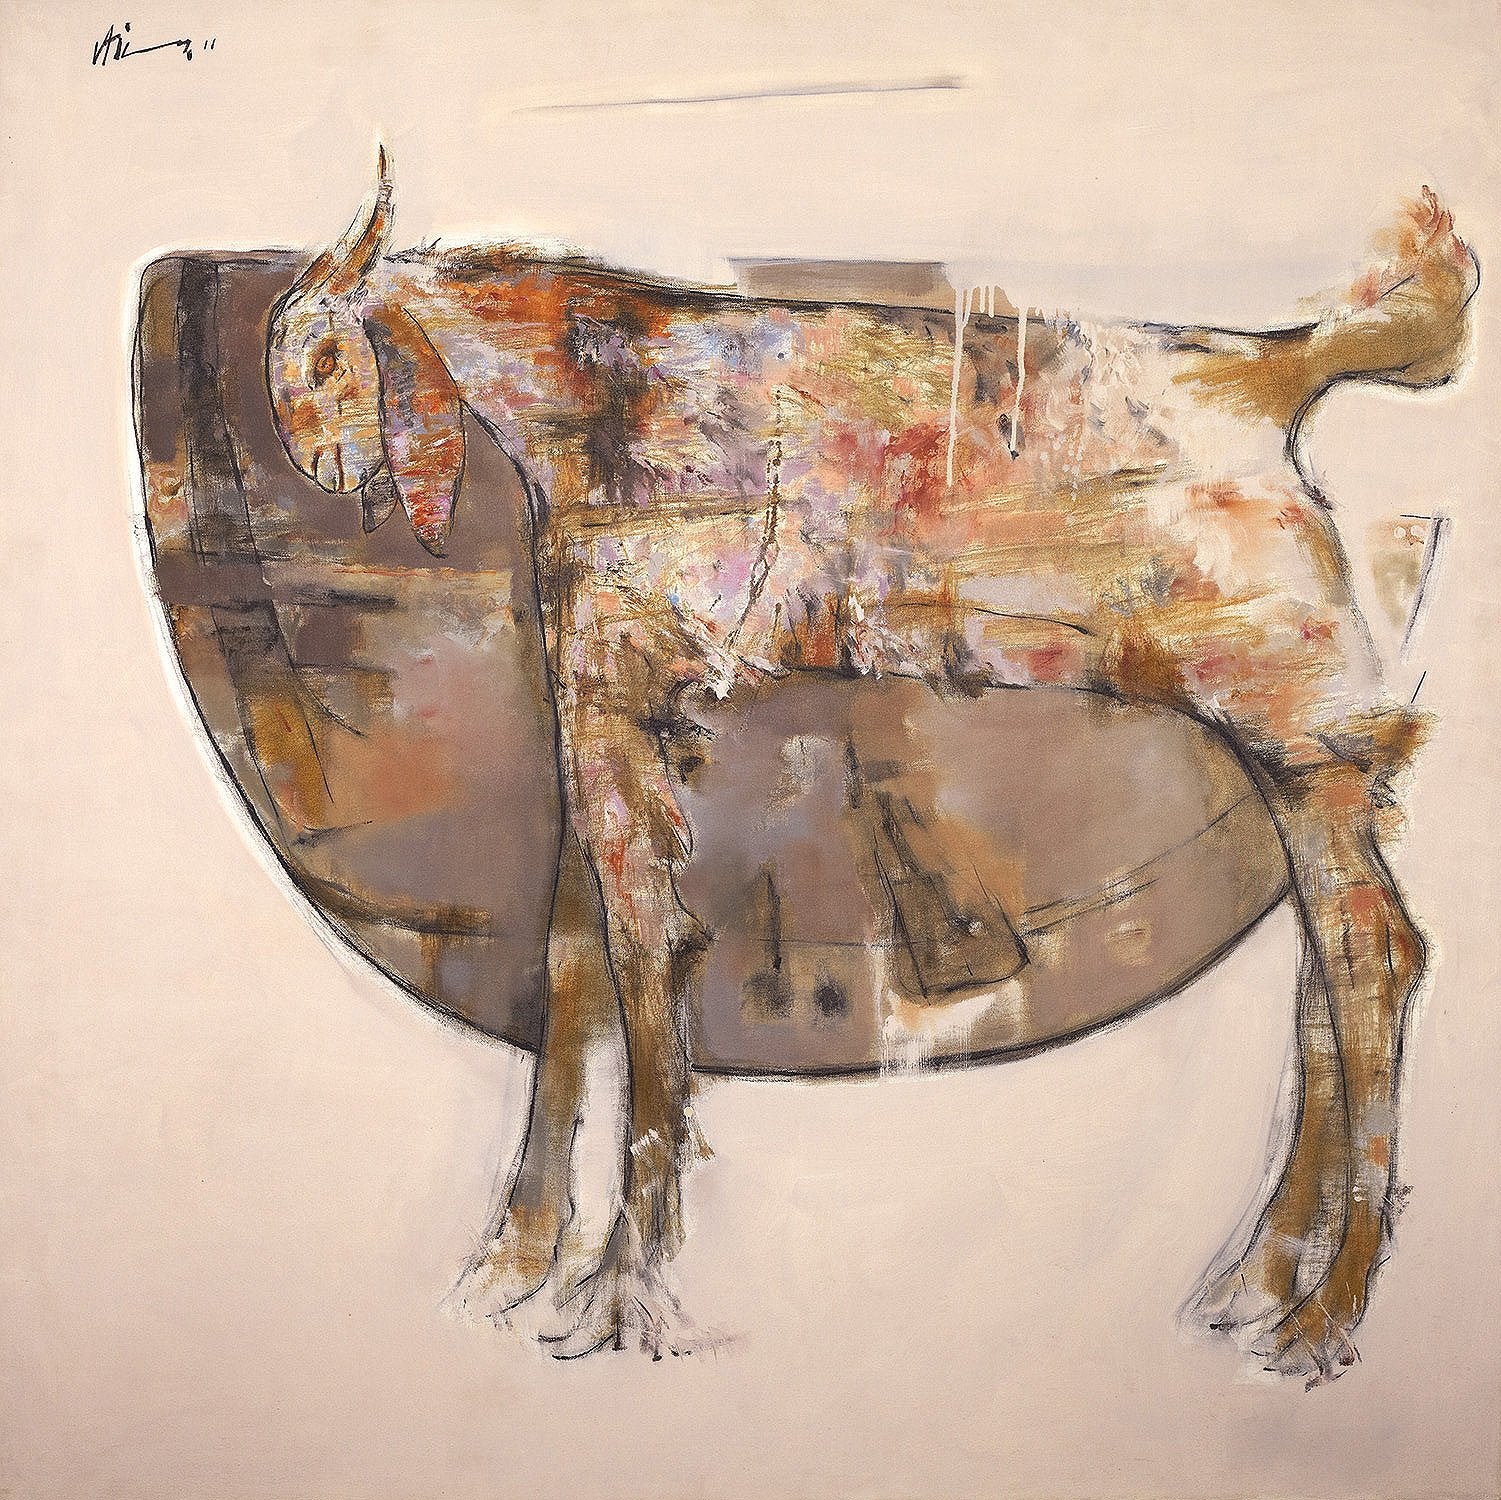 The wild goat 2|Ajay Deshpande- Oil on Canvas, 2011, 48 x 48 inches